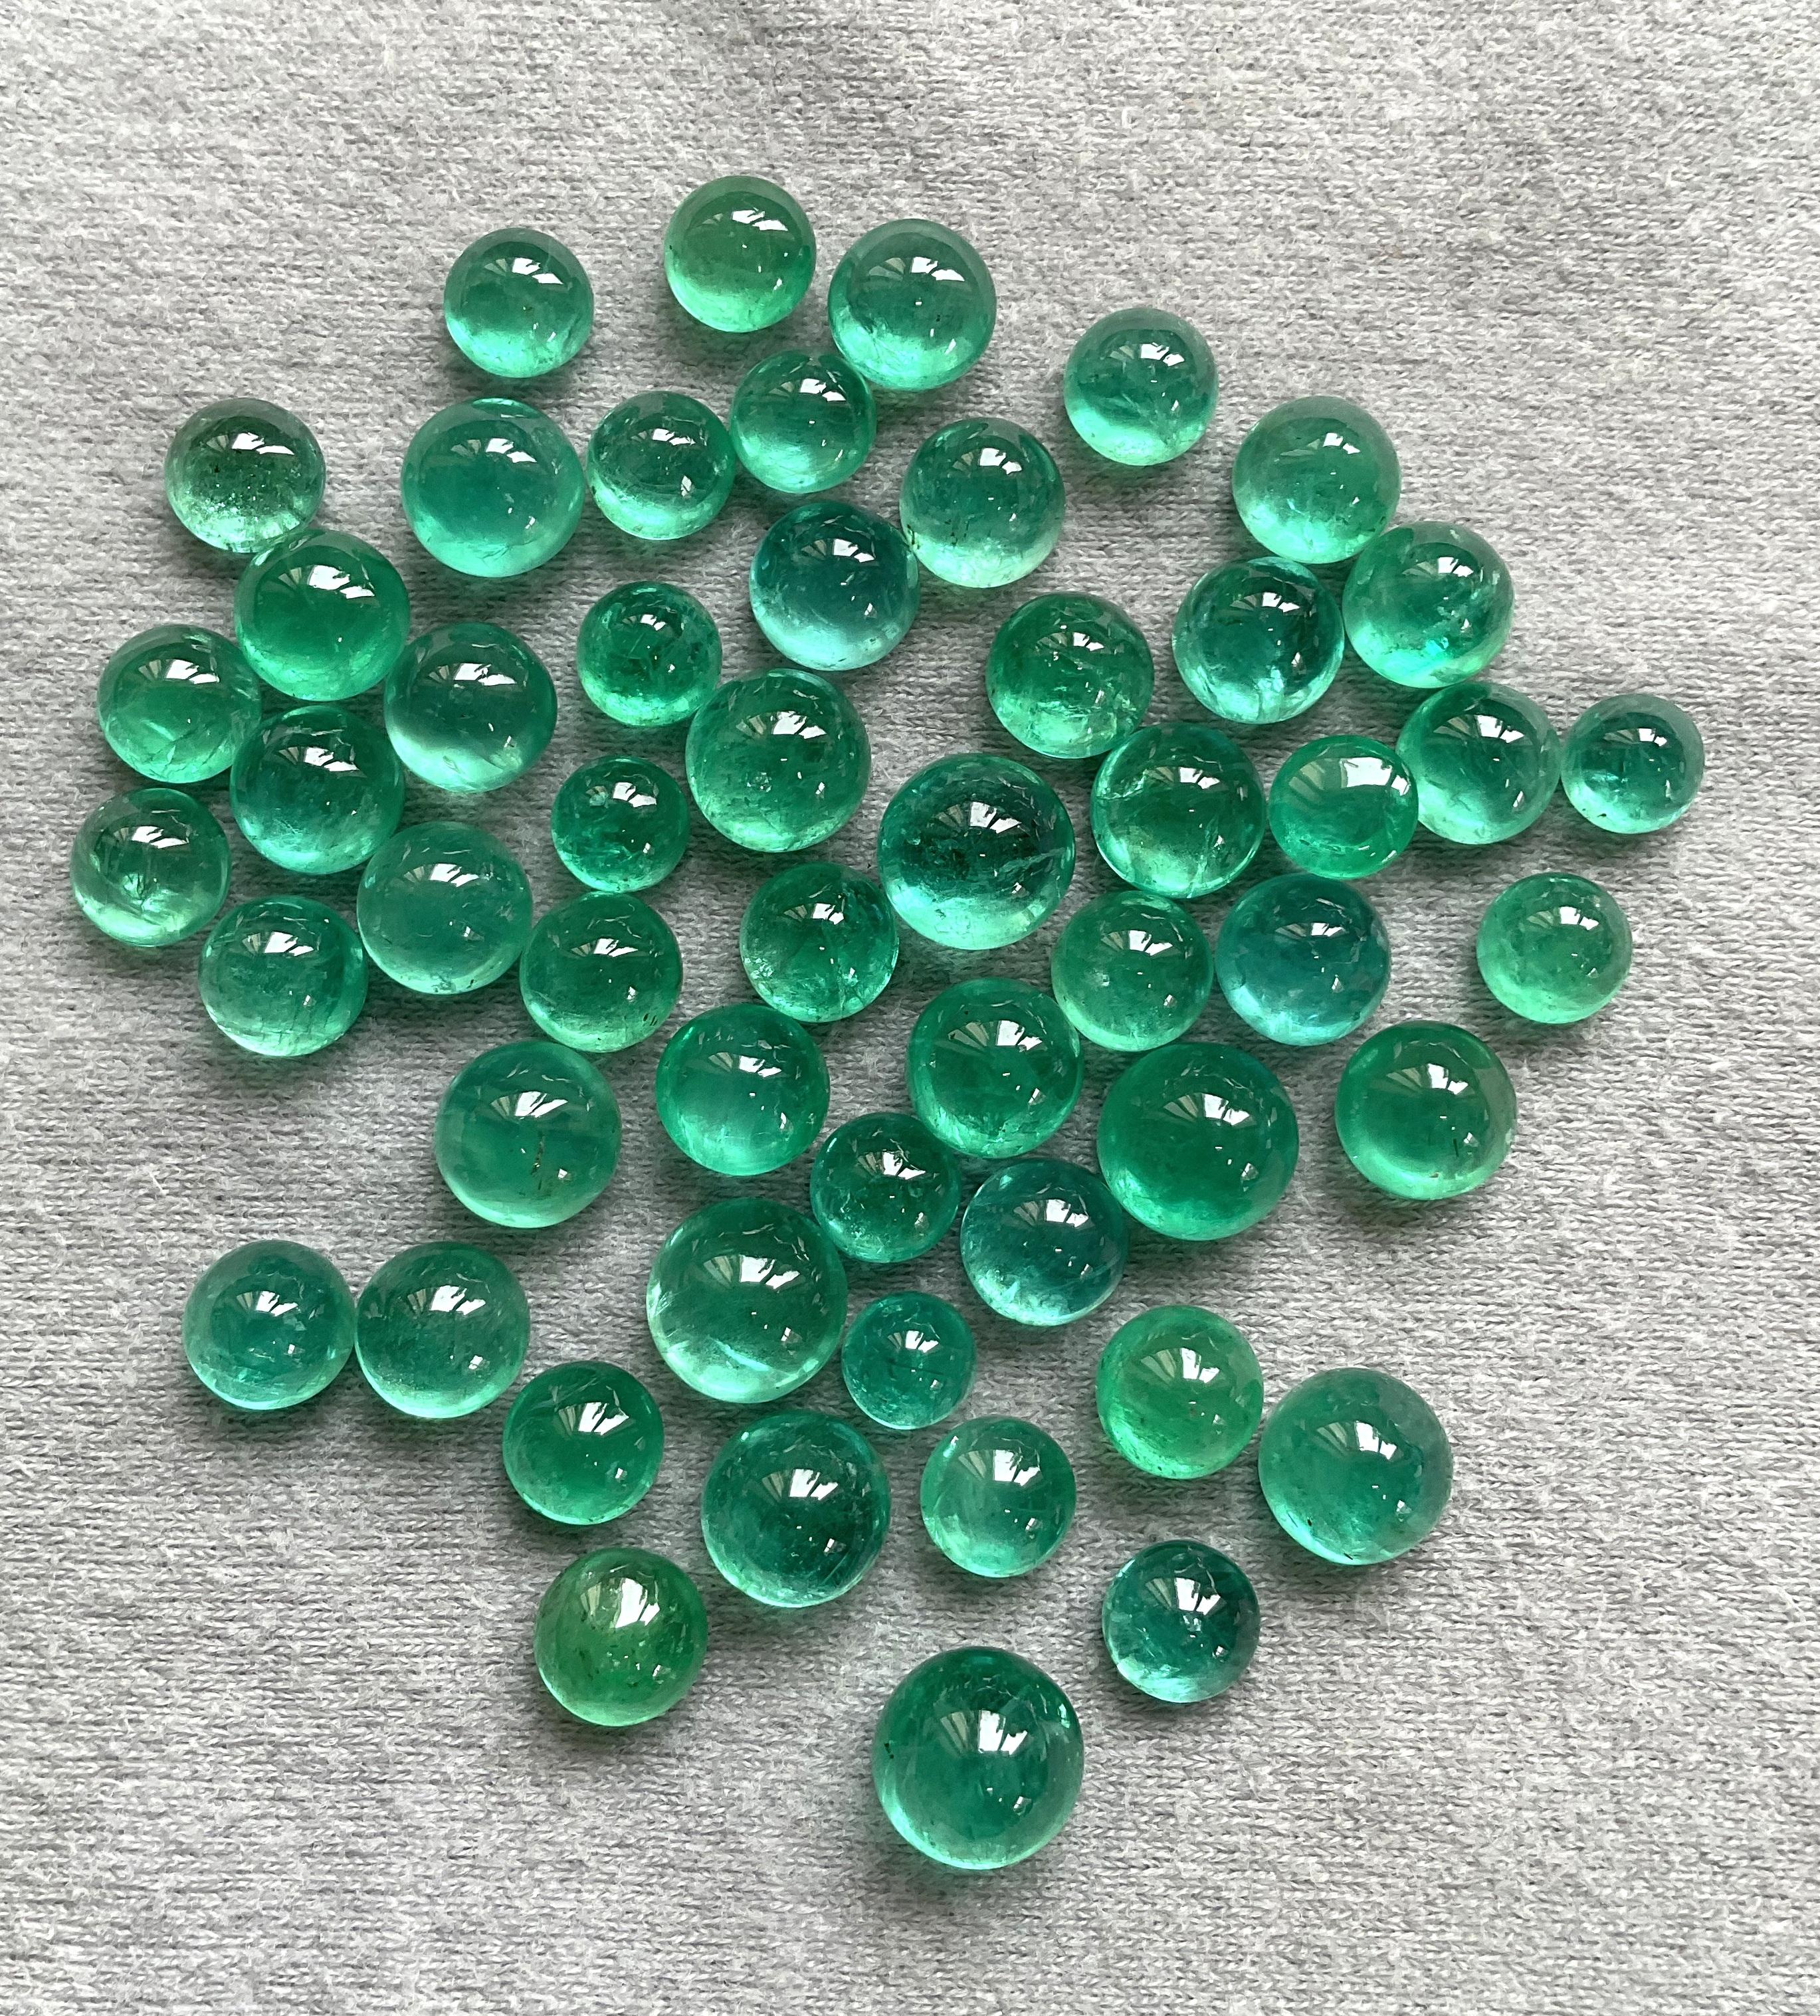 111.00 carats Zambian Emerald Round Plain Cabs Top Quality For Jewelry Gemstone  Neuf - En vente à Jaipur, RJ